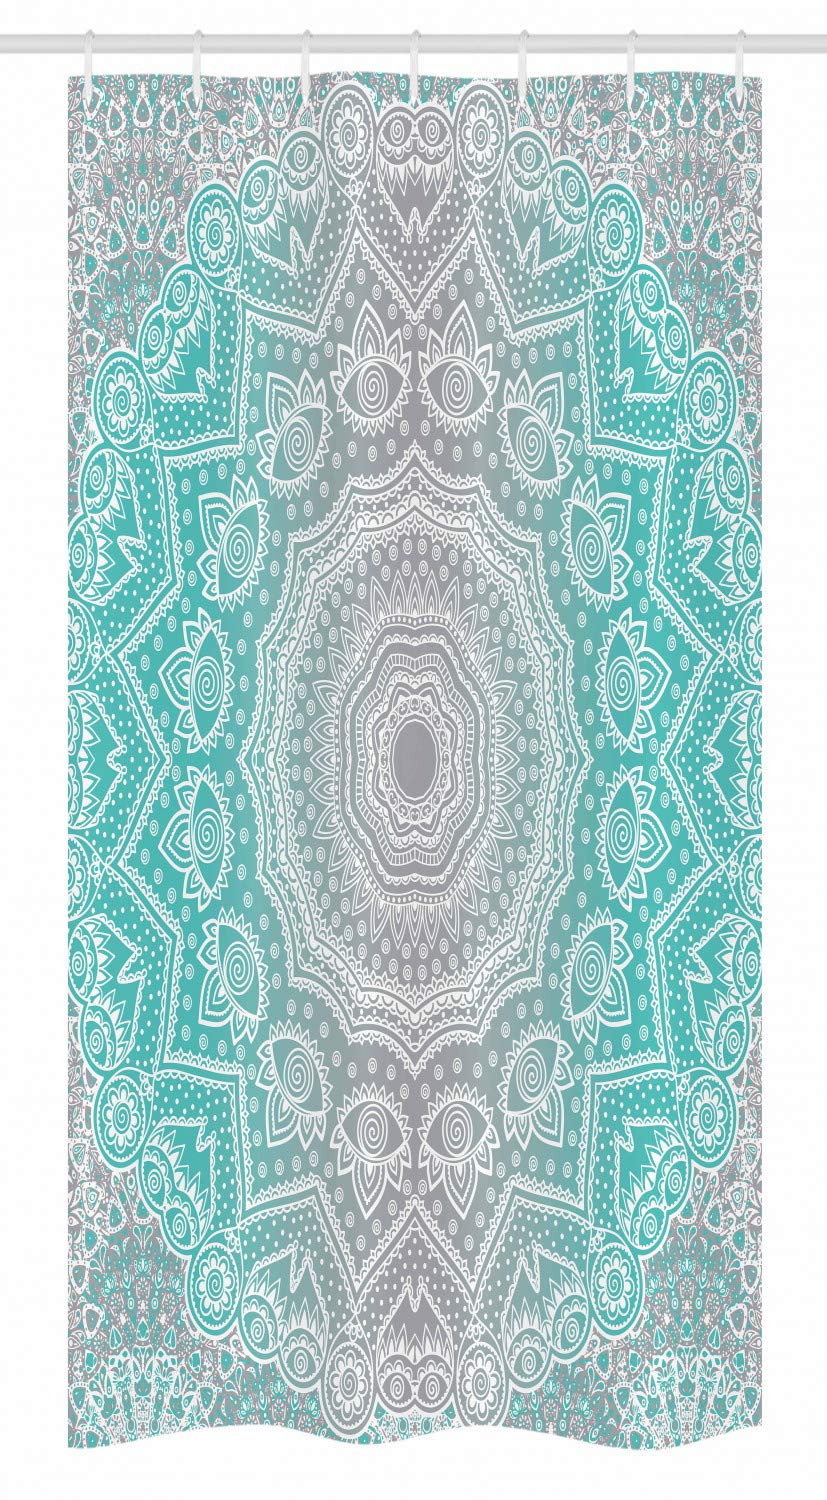 Ambesonne Grey and Turquoise Stall Shower Curtain, Primitive Essence and Universe Harmony Mandala Ombre Art, Fabric Bathroom Decor Set with Hooks, 36